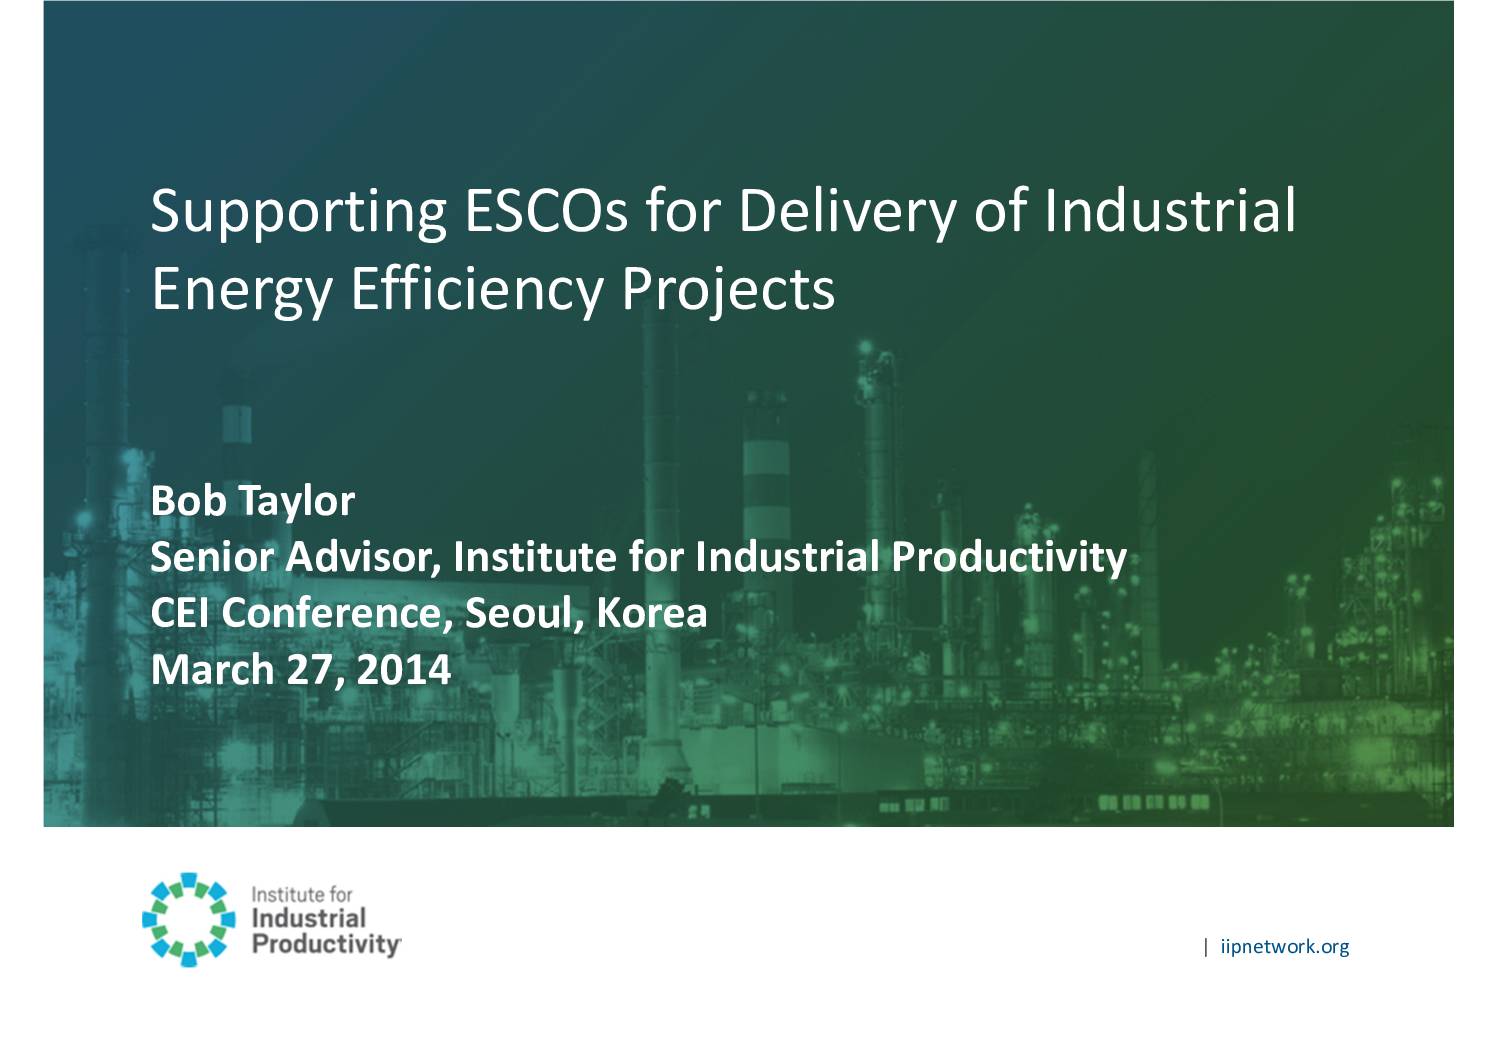 Supporting ESCOs for Delivery of Industrial Energy Efficiency Projects